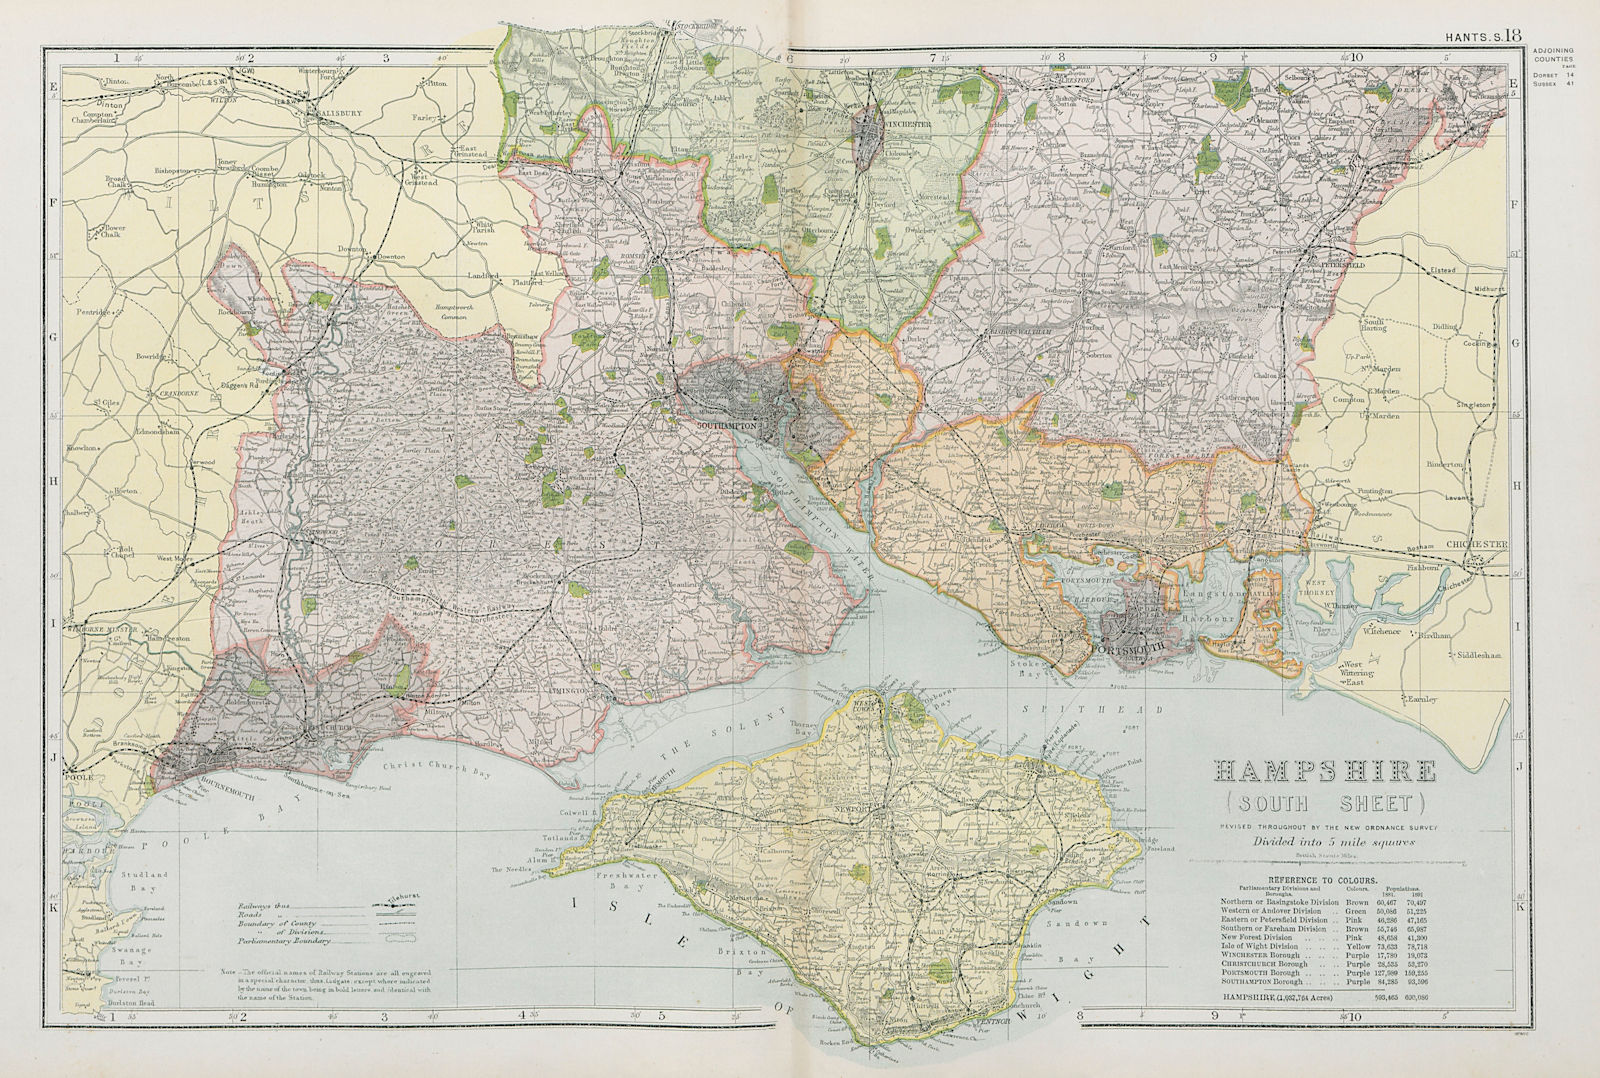 Associate Product HAMPSHIRE SOUTH & ISLE OF WIGHT. Parliamentary divisions & parks. BACON 1900 map